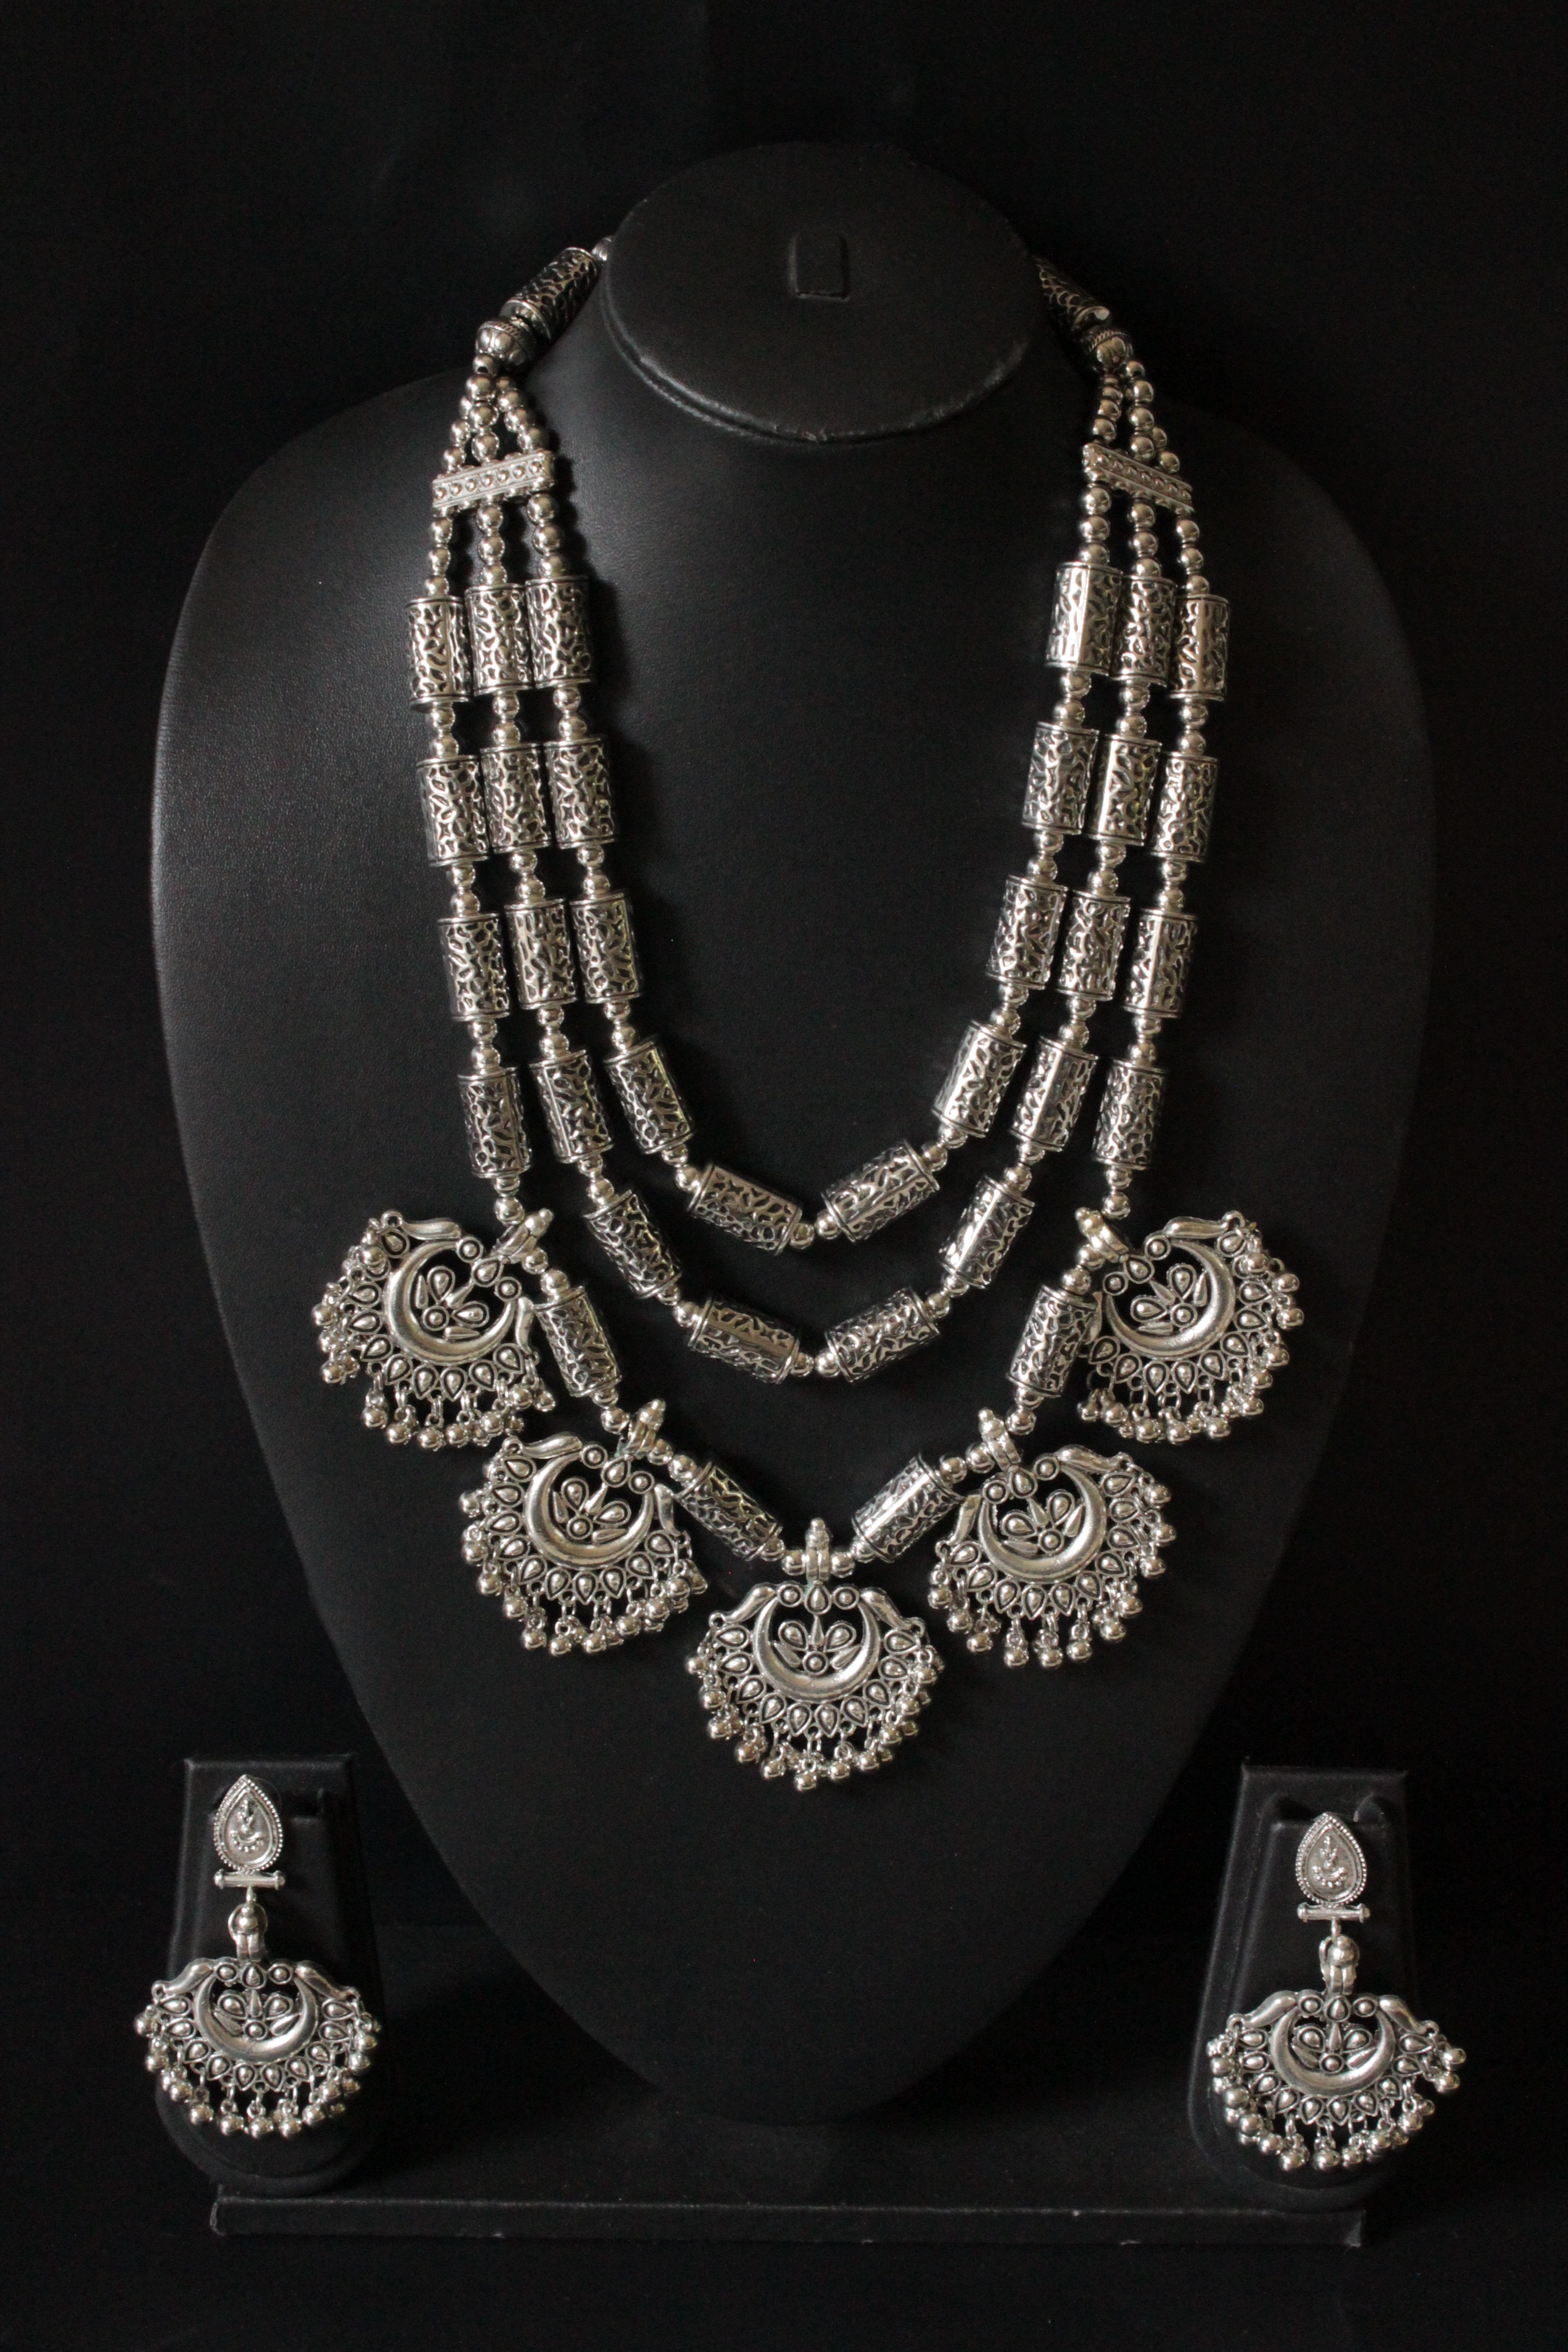 3 Layer Elaborate Silver Finish Metal Necklace Set with Dangler Earrings